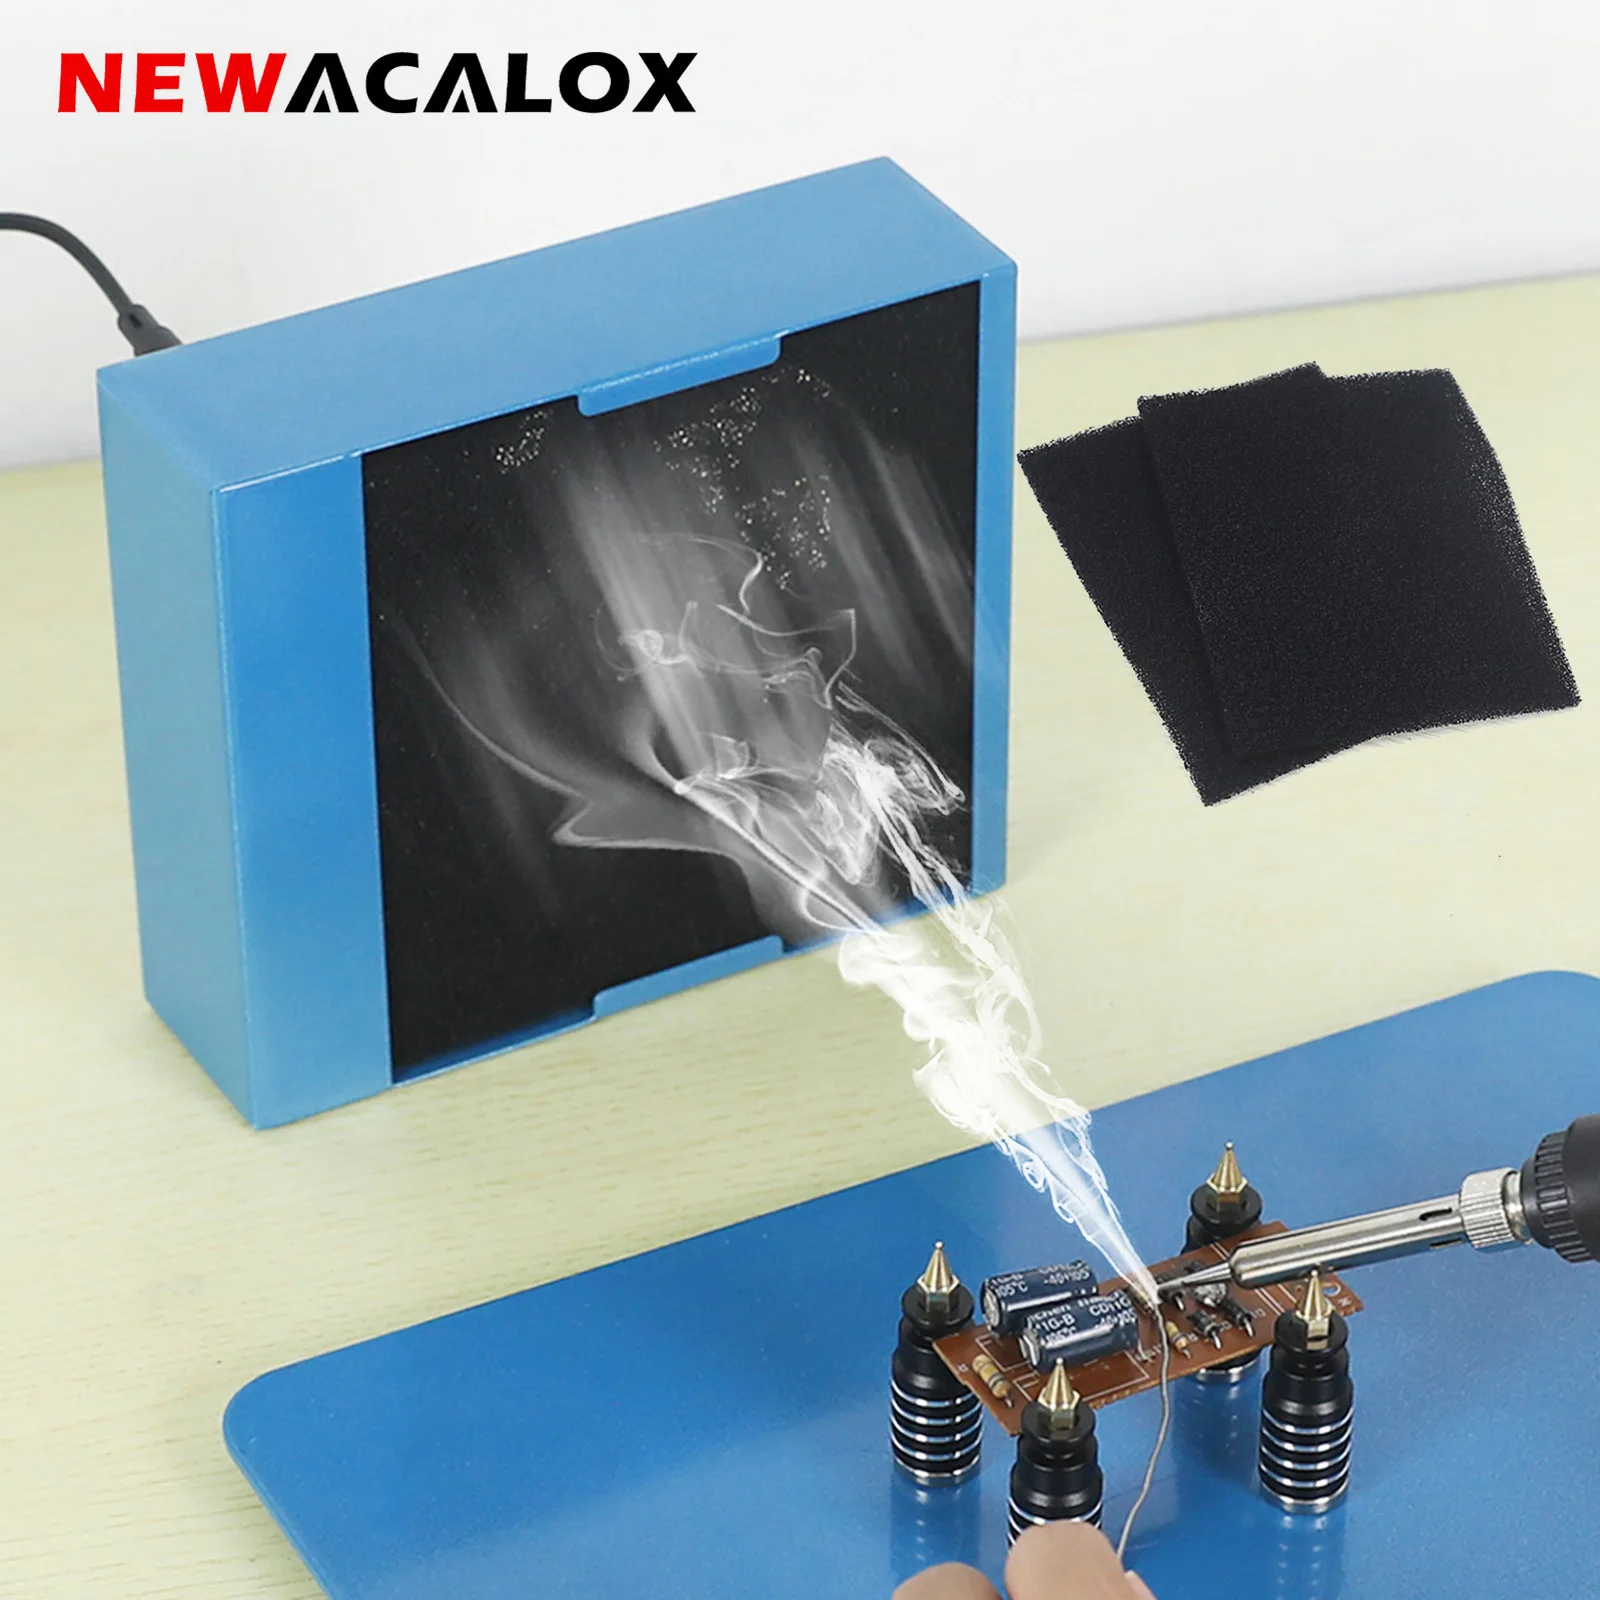 NEWACALOX 30W Soldering Smoke Absorber Fan with 2 Pcs Active Carbon Filters  Welding Fume Extractor Quiet Soldering Fan newacalox eu us 12v welding fume extractor soldering exhaust fan with 3 colors led light 2pcs flexible soldering third hand tool